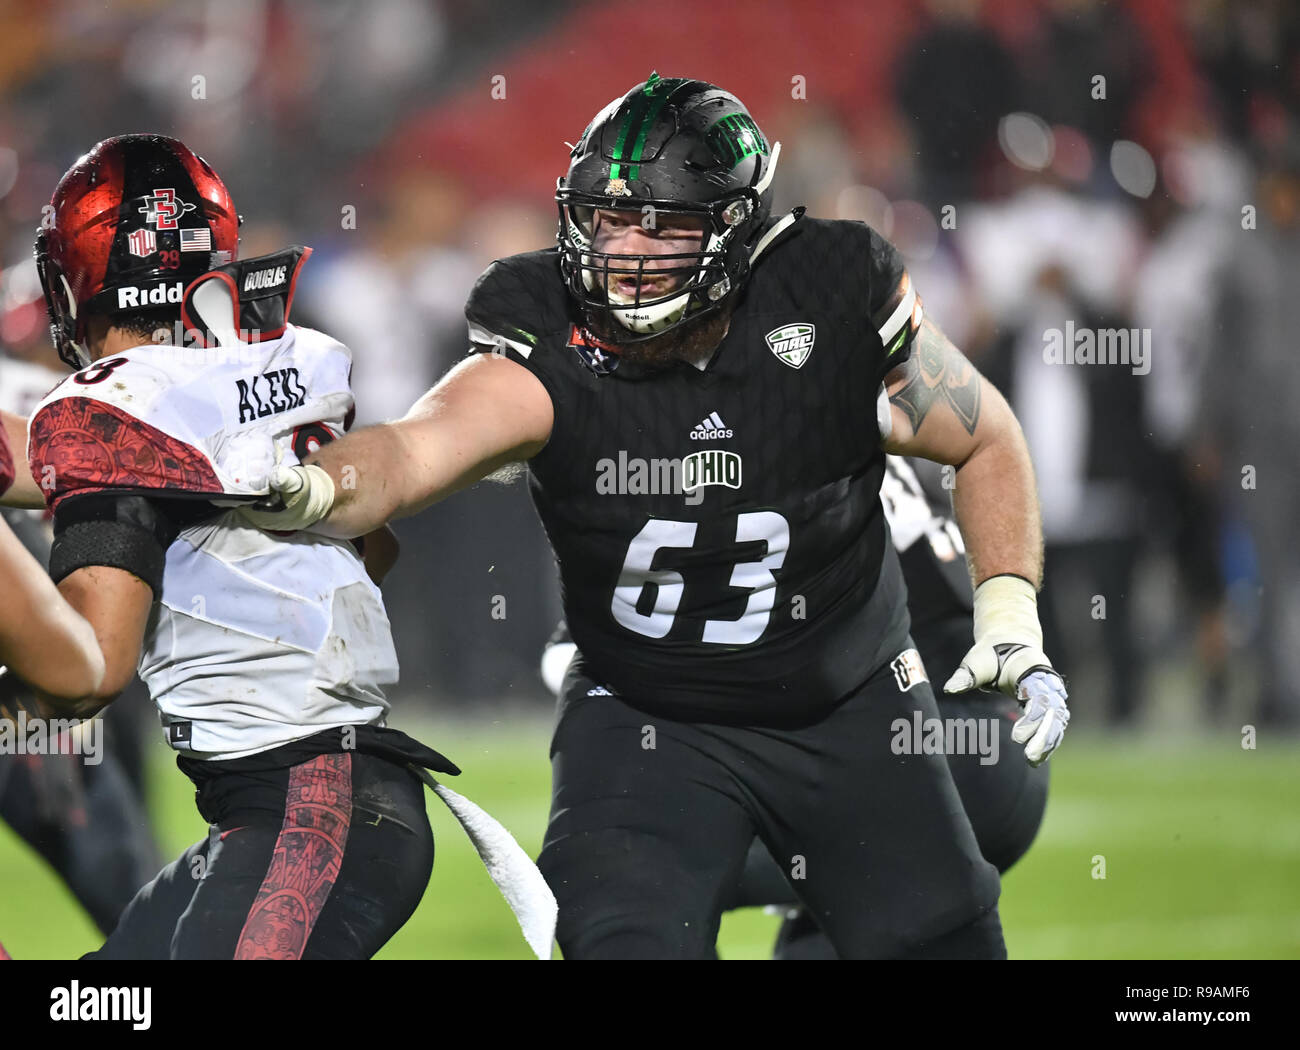 Frisco, TX, USA. 19th Dec, 2018. Ohio University Bobcat lineman, Joe Anderson (63), in action at the NCAA football Frisco Bowl game between the Ohio Bobcats and the San Diego State Aztecs at the Frisco Bowl, in Frisco, TX. (Absolute Complete Photographer & Company Credit: Joe Calomeni/MarinMedia.org/Cal Sport Media) Credit: csm/Alamy Live News Stock Photo